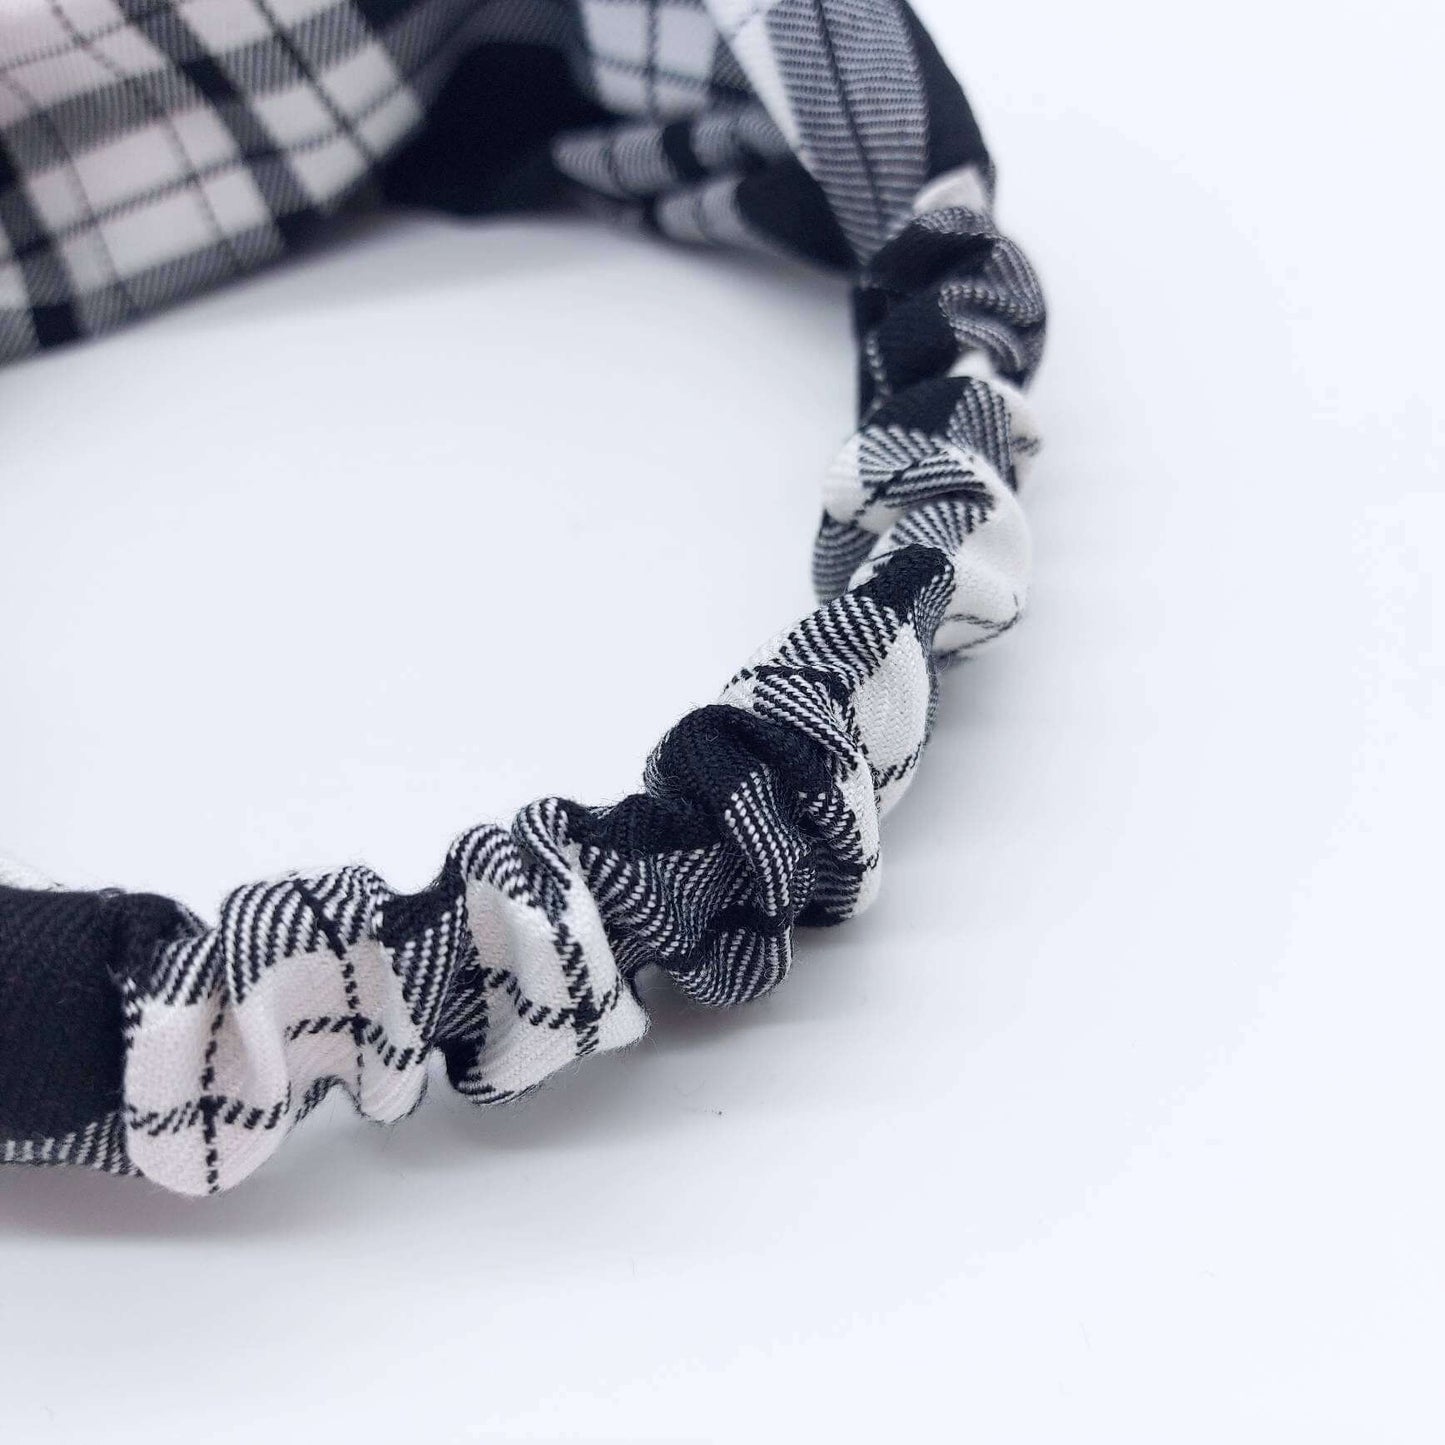 A soft, black and white tartan plaid check, turban twist headband with an elasticated panel at the back.